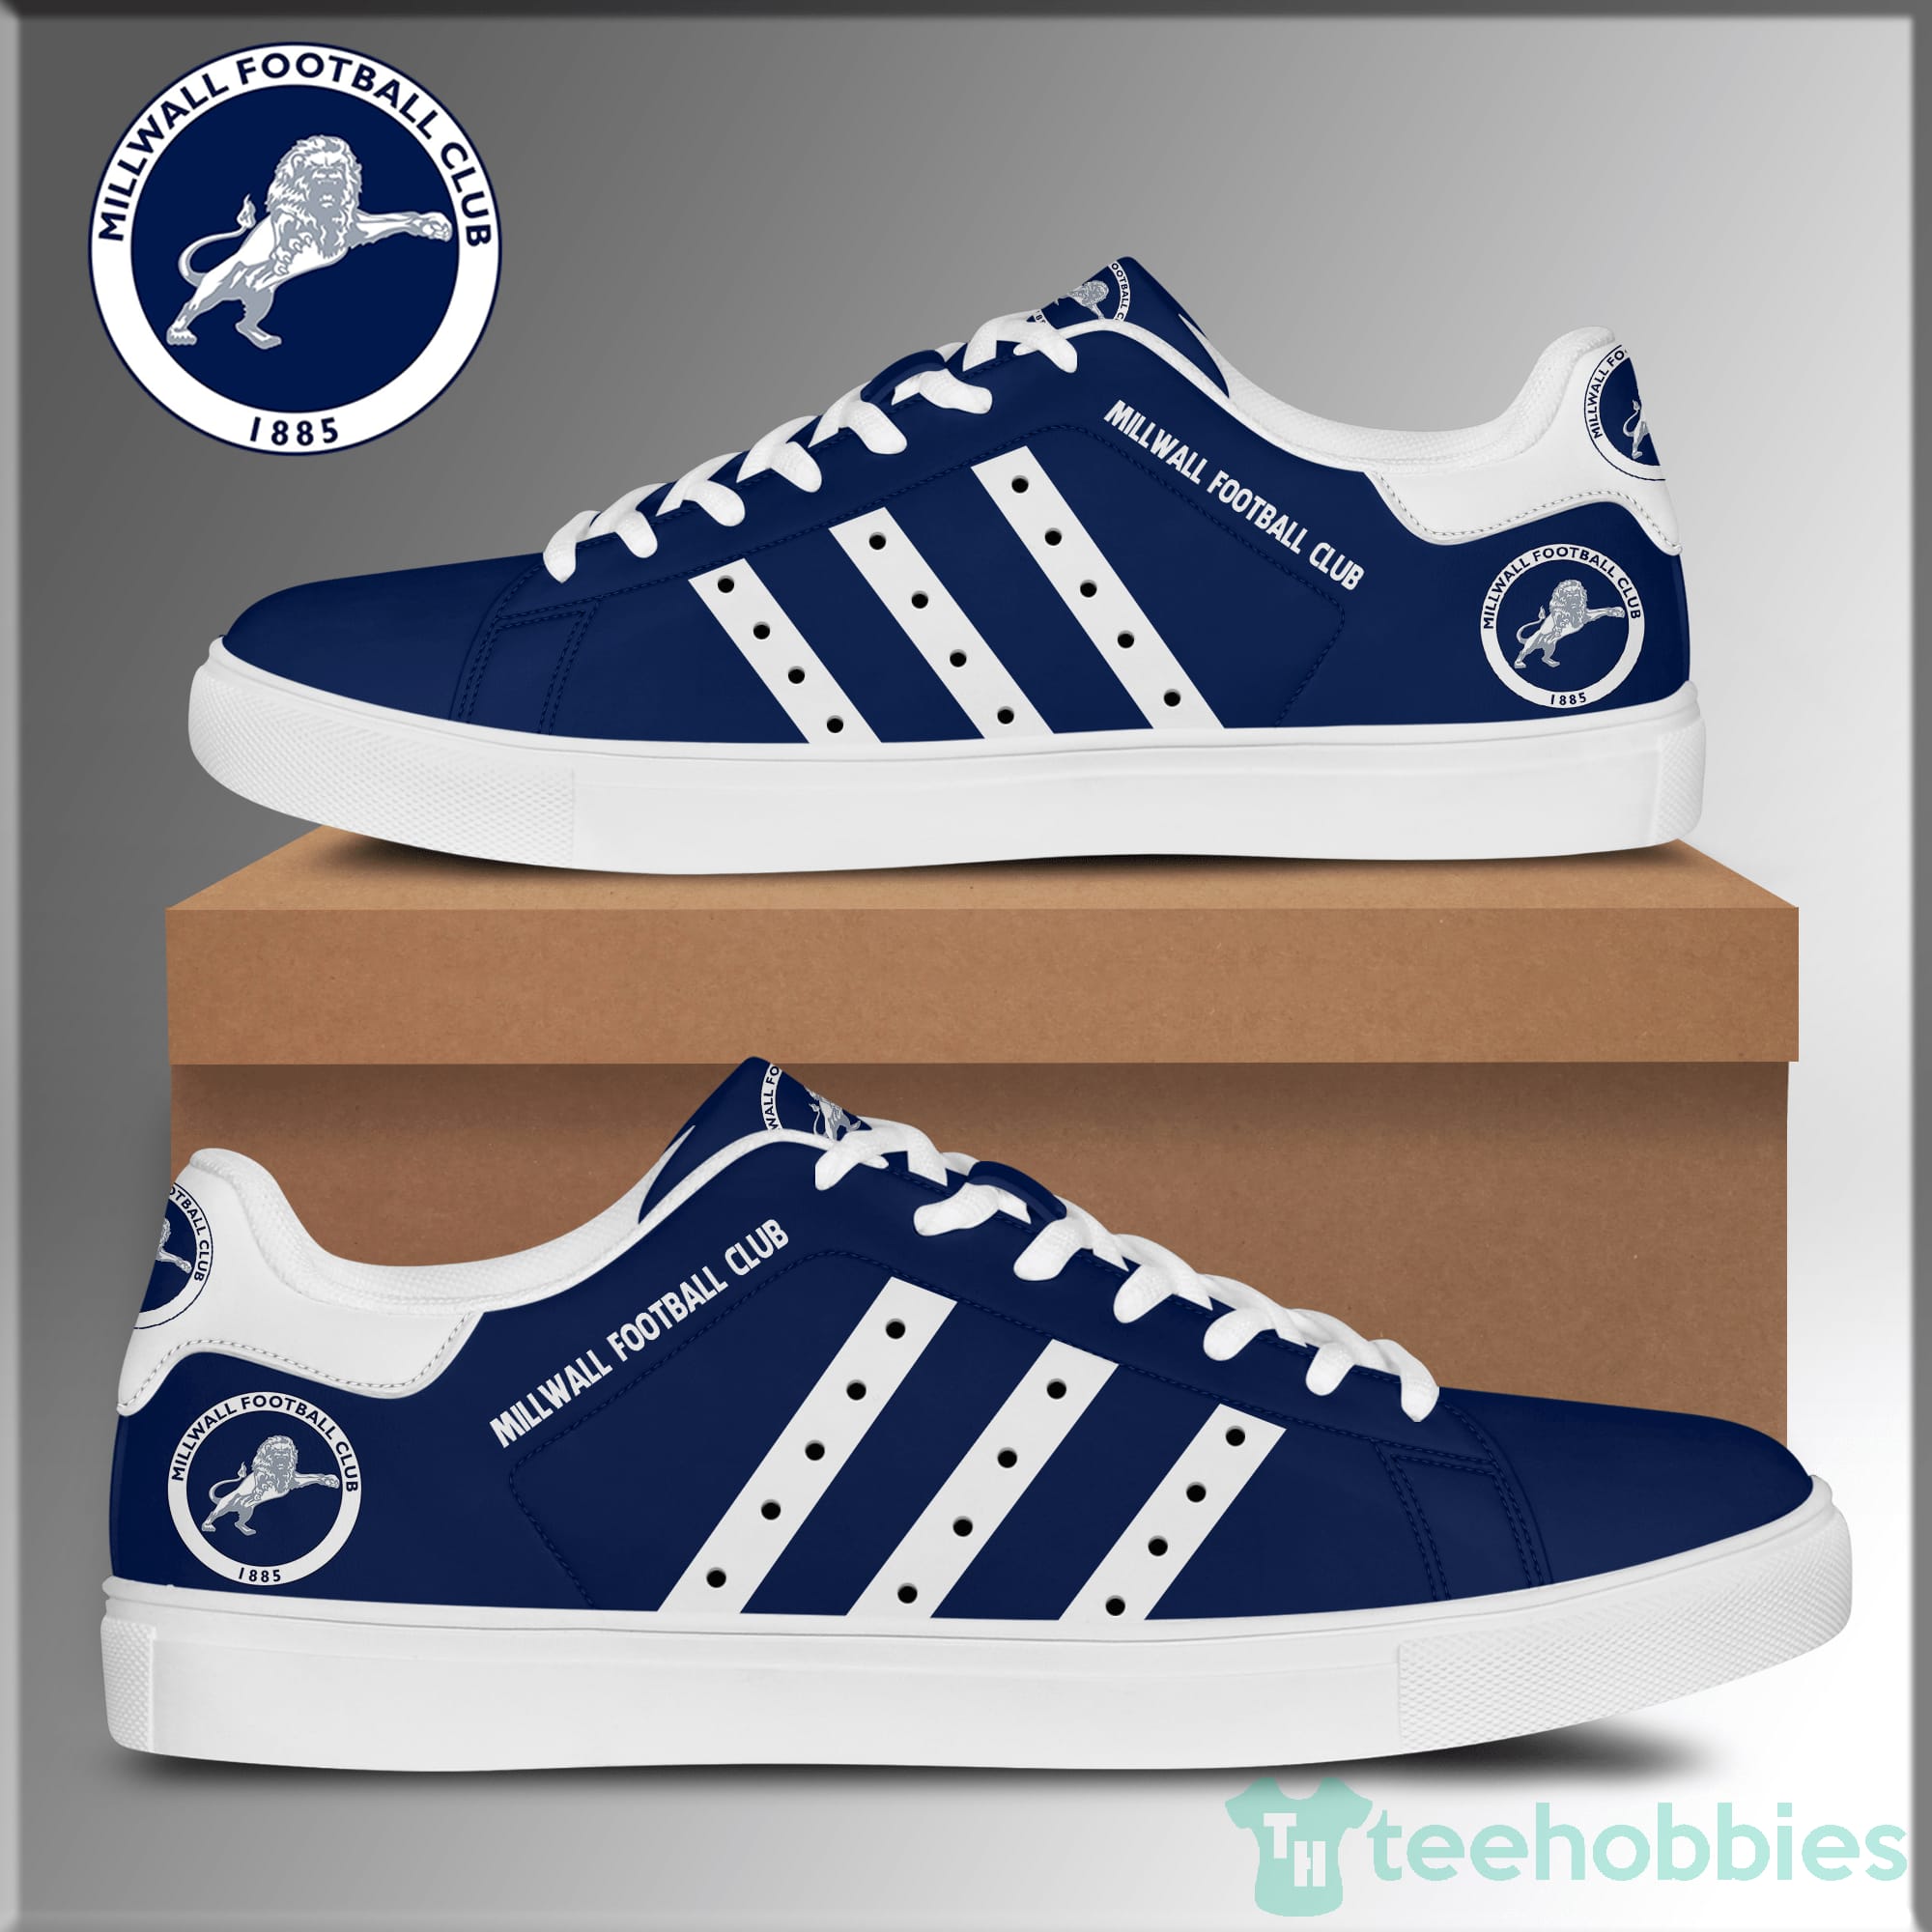 Millwall Football Club Navy Low Top Skate Shoes Product photo 1